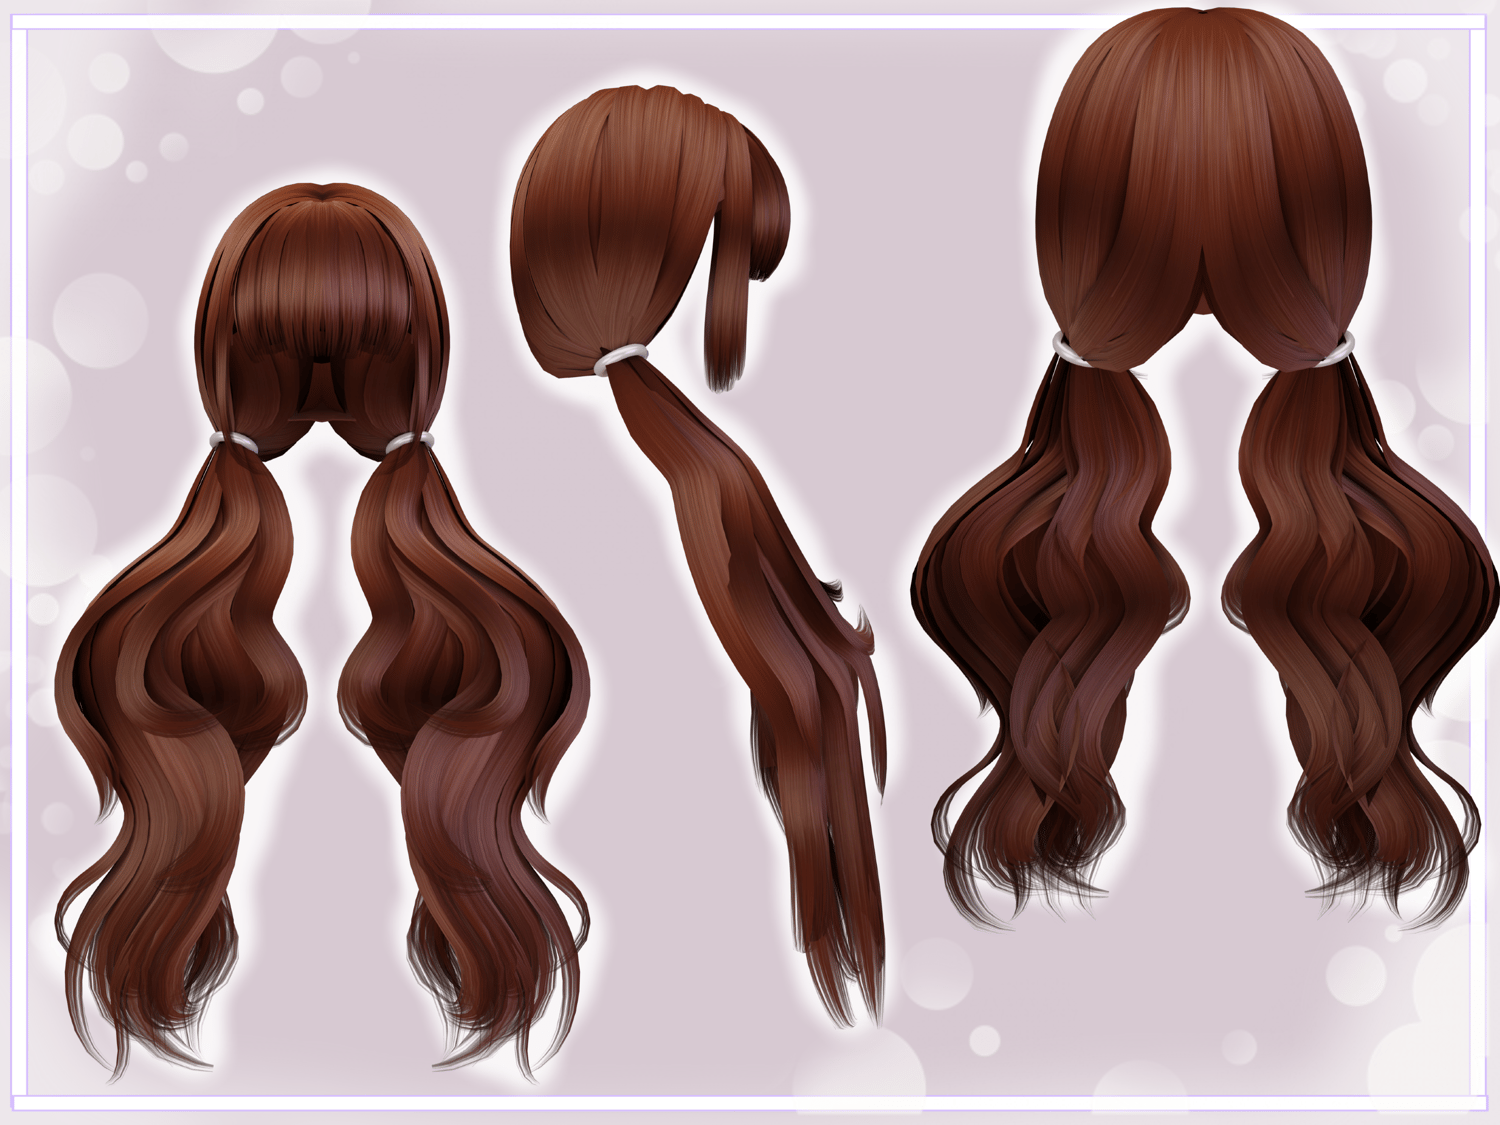 TRIXIE HAIR (FREE IN SERVER) - Payhip